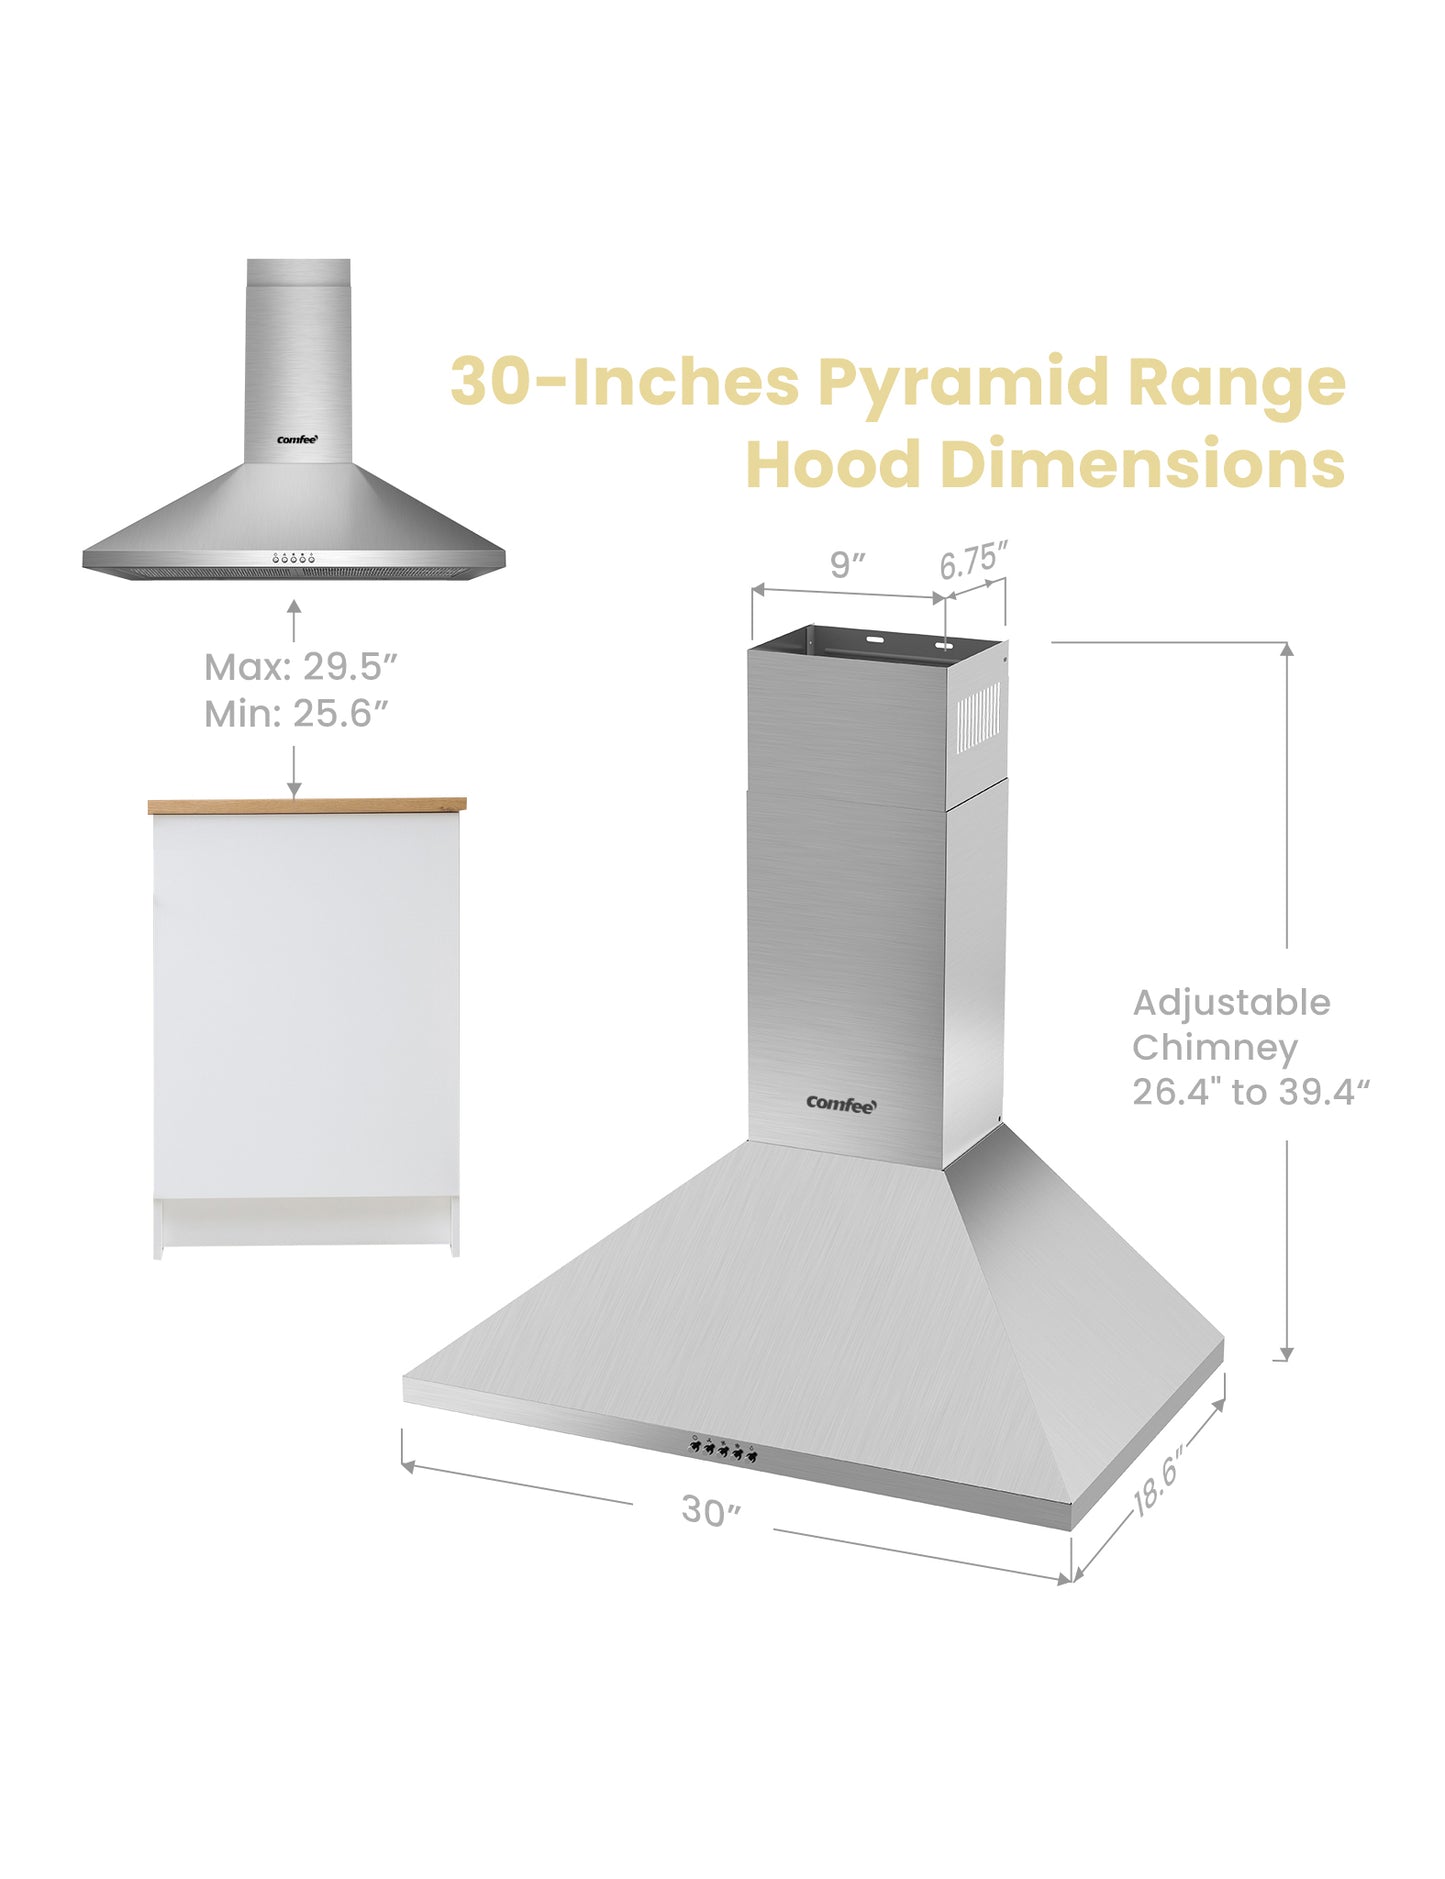  COMFEE' CVP30W6AST Ducted Pyramid Range 450 CFM Stainless Steel  Wall Mount Vent Hood with 3 Speed Exhaust Fan, 5-Layer Aluminum Permanent  Filters, Two LED Lights, Convertible to Ductless, 30 inches : Appliances